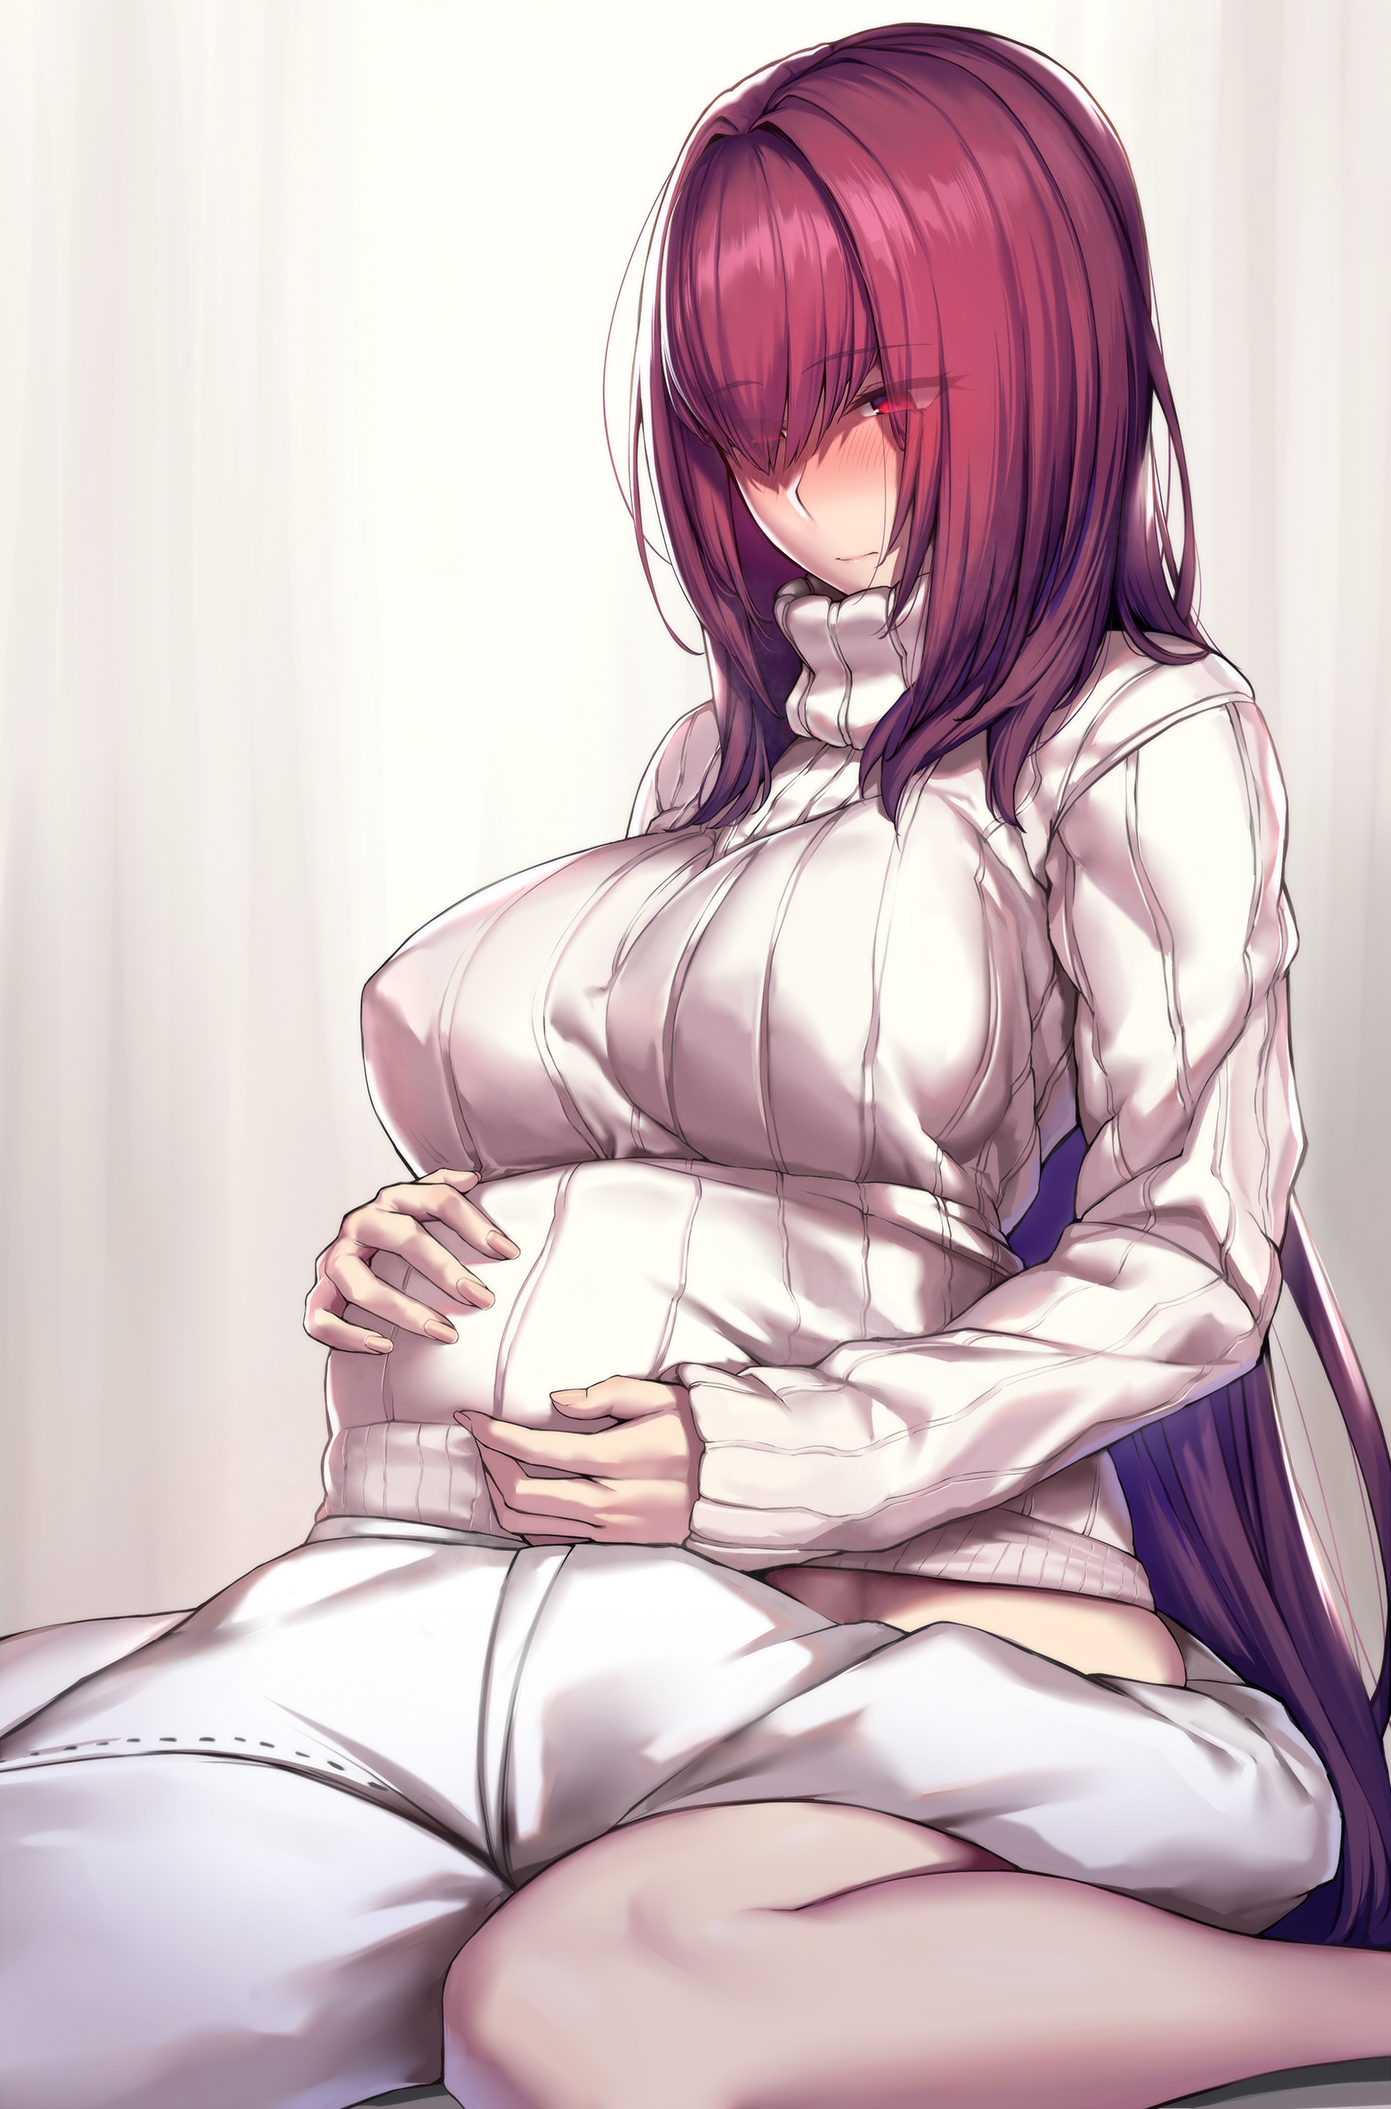 Anime 1391x2109 anime anime girls Lun7732 Fate series Fate/Grand Order Scathach couple hugging sweater kneeling purple hair red eyes blushing big boobs embarrassed